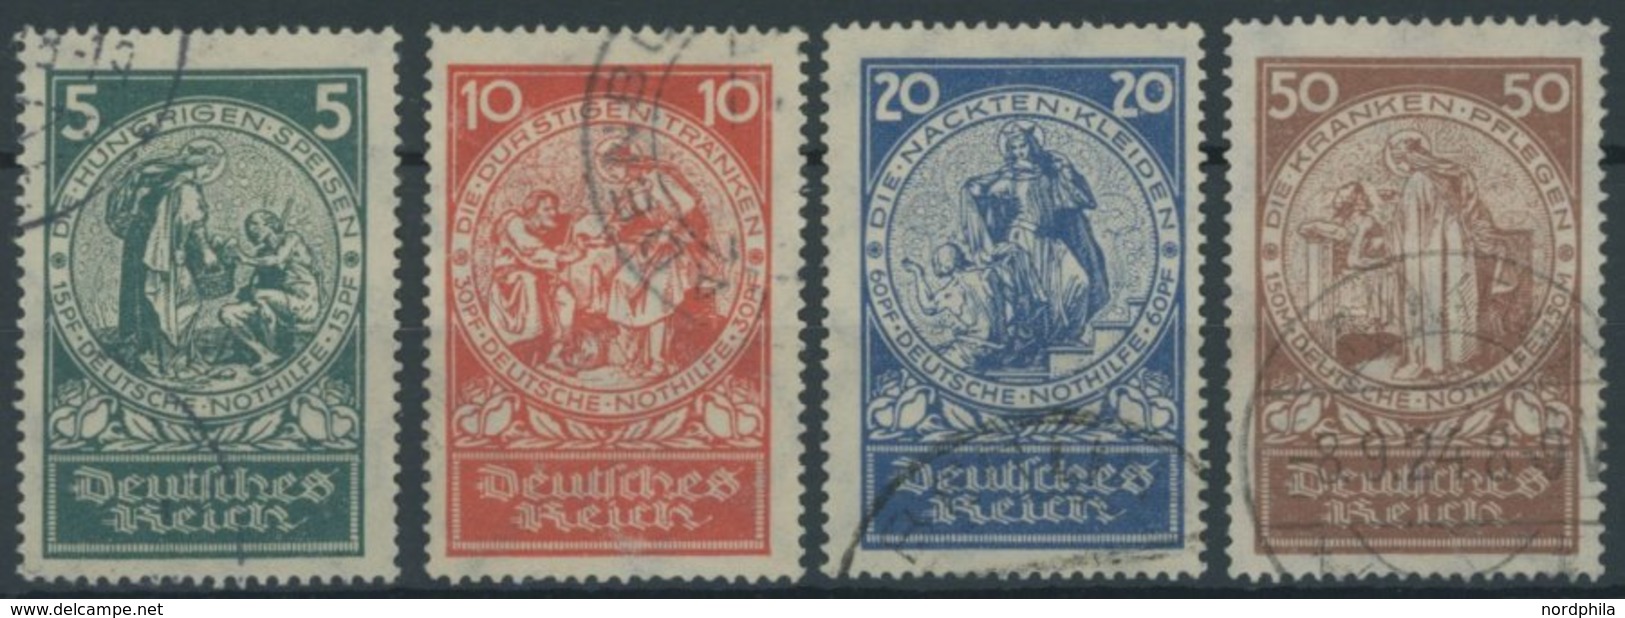 Dt. Reich 351-54 O, 1924, Nothilfe, Prachtsatz, Mi. 100.- - Used Stamps